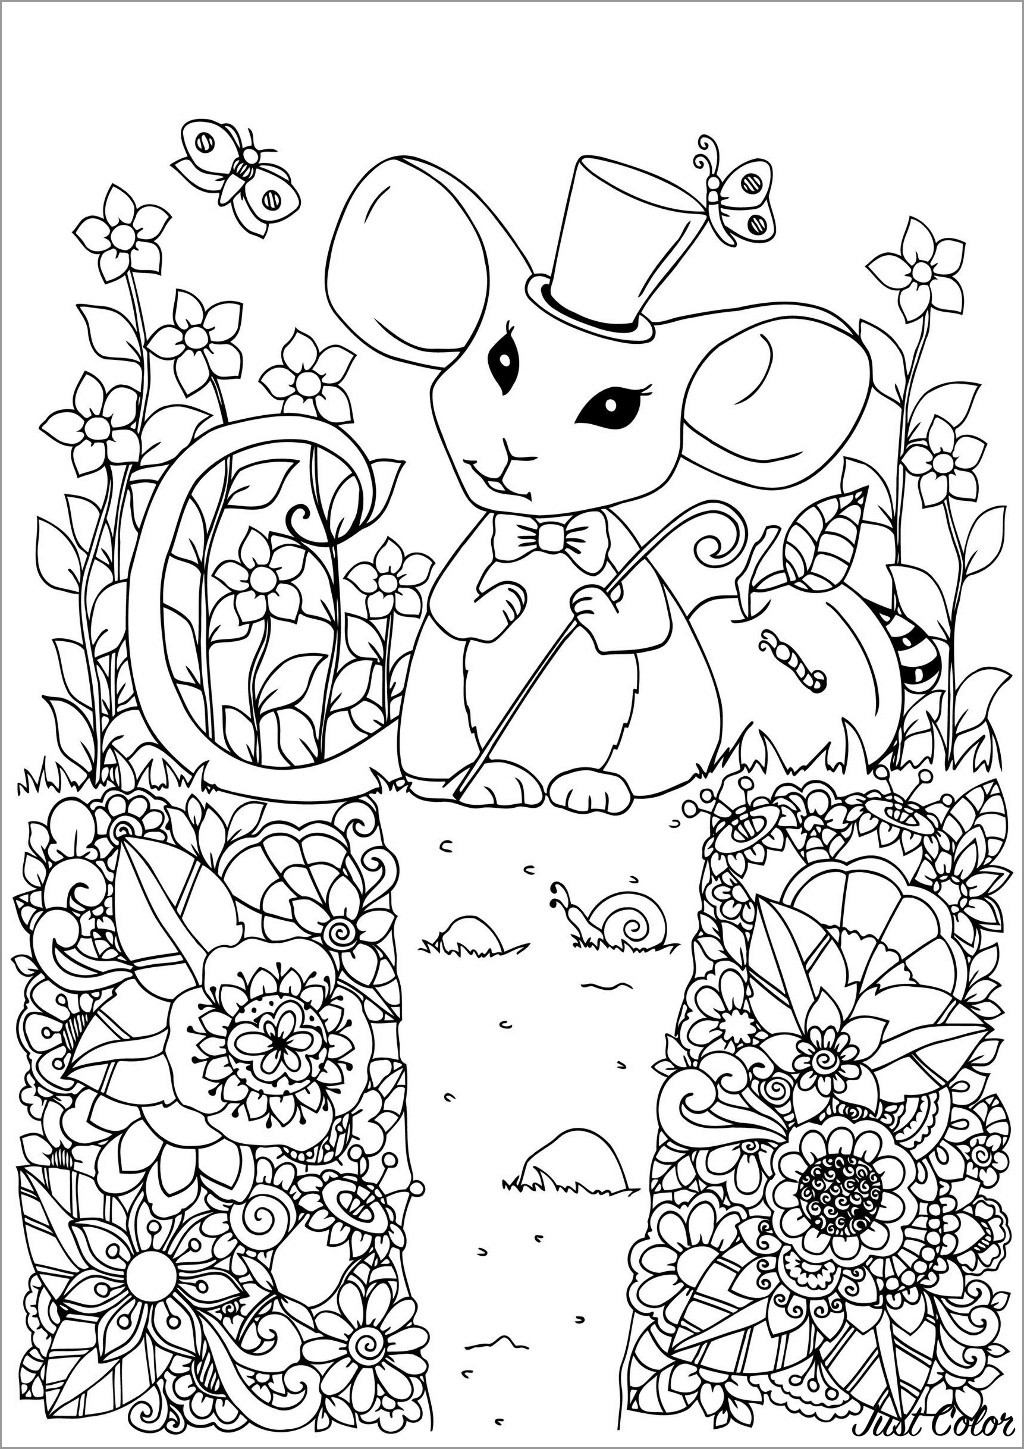 Mouse Coloring Page for Adult